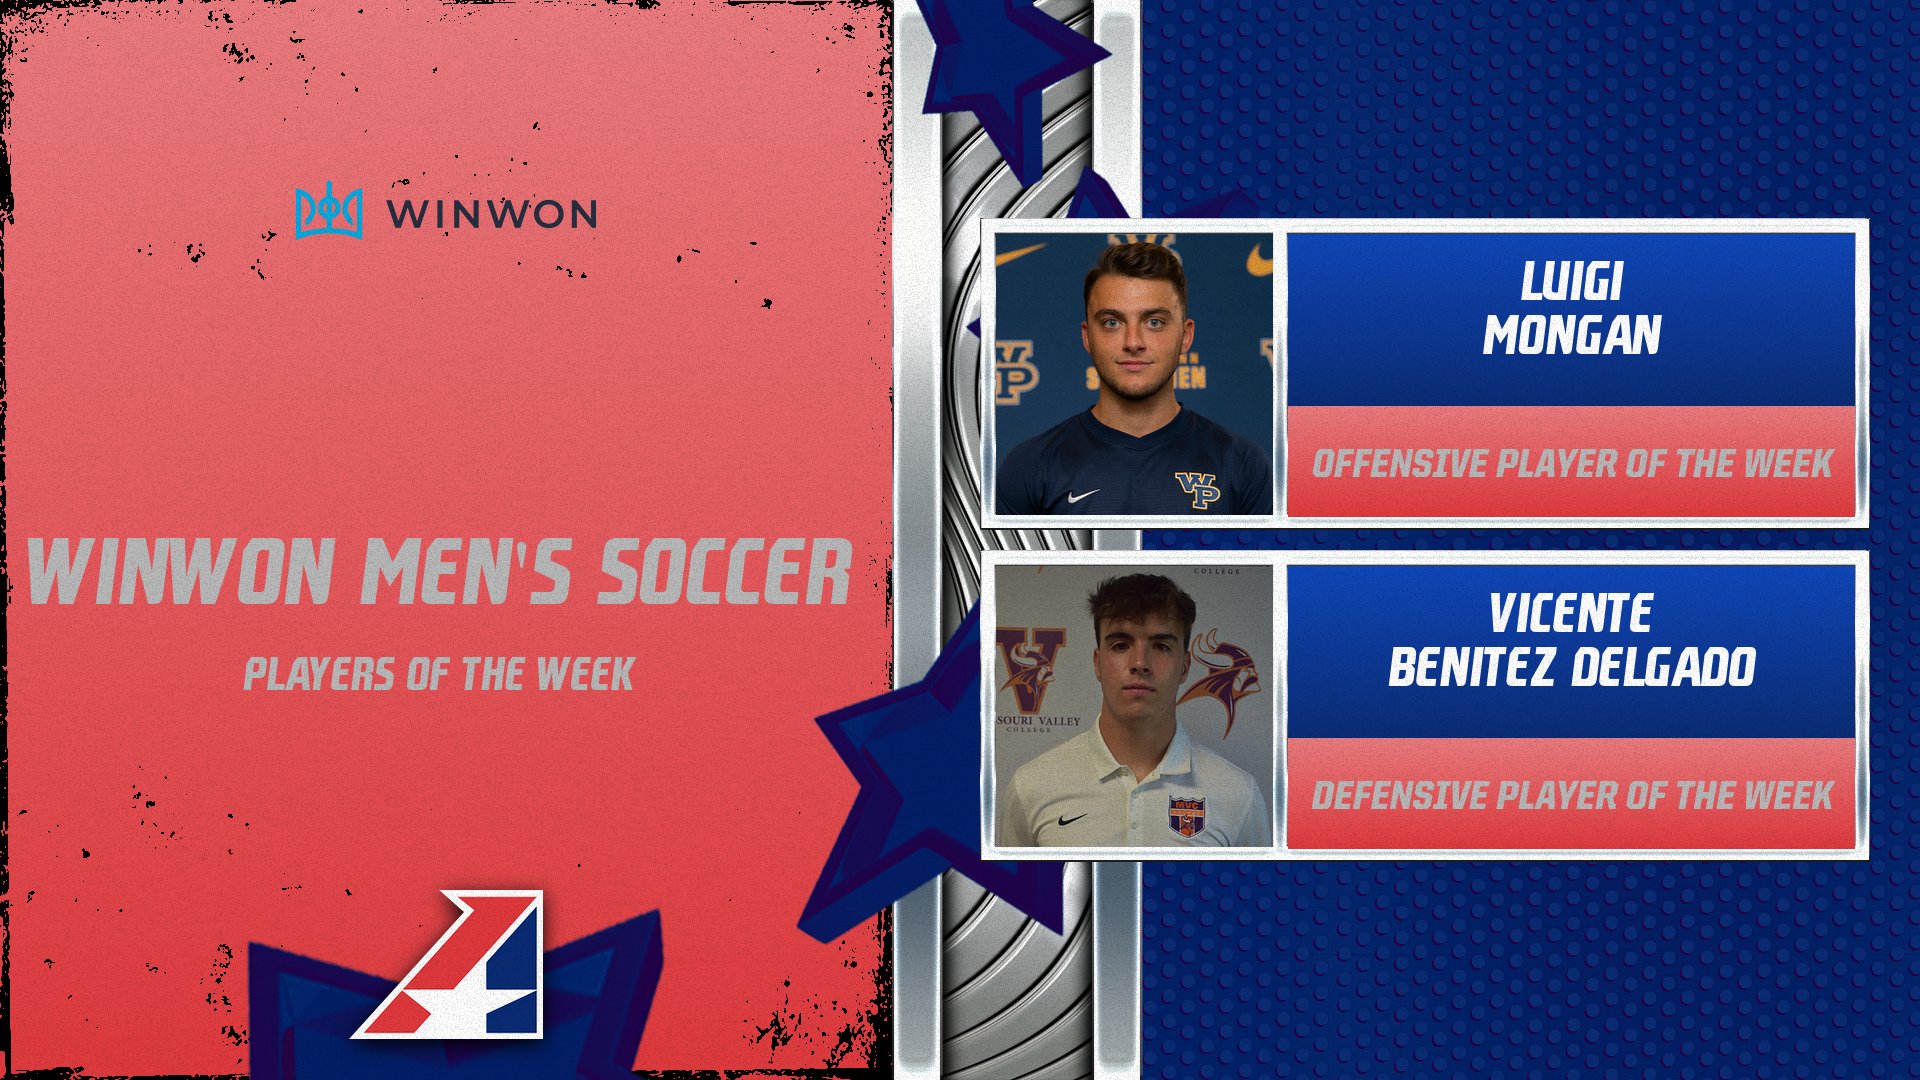 WinWon Men’s Soccer Players of the Week Announced – October 9